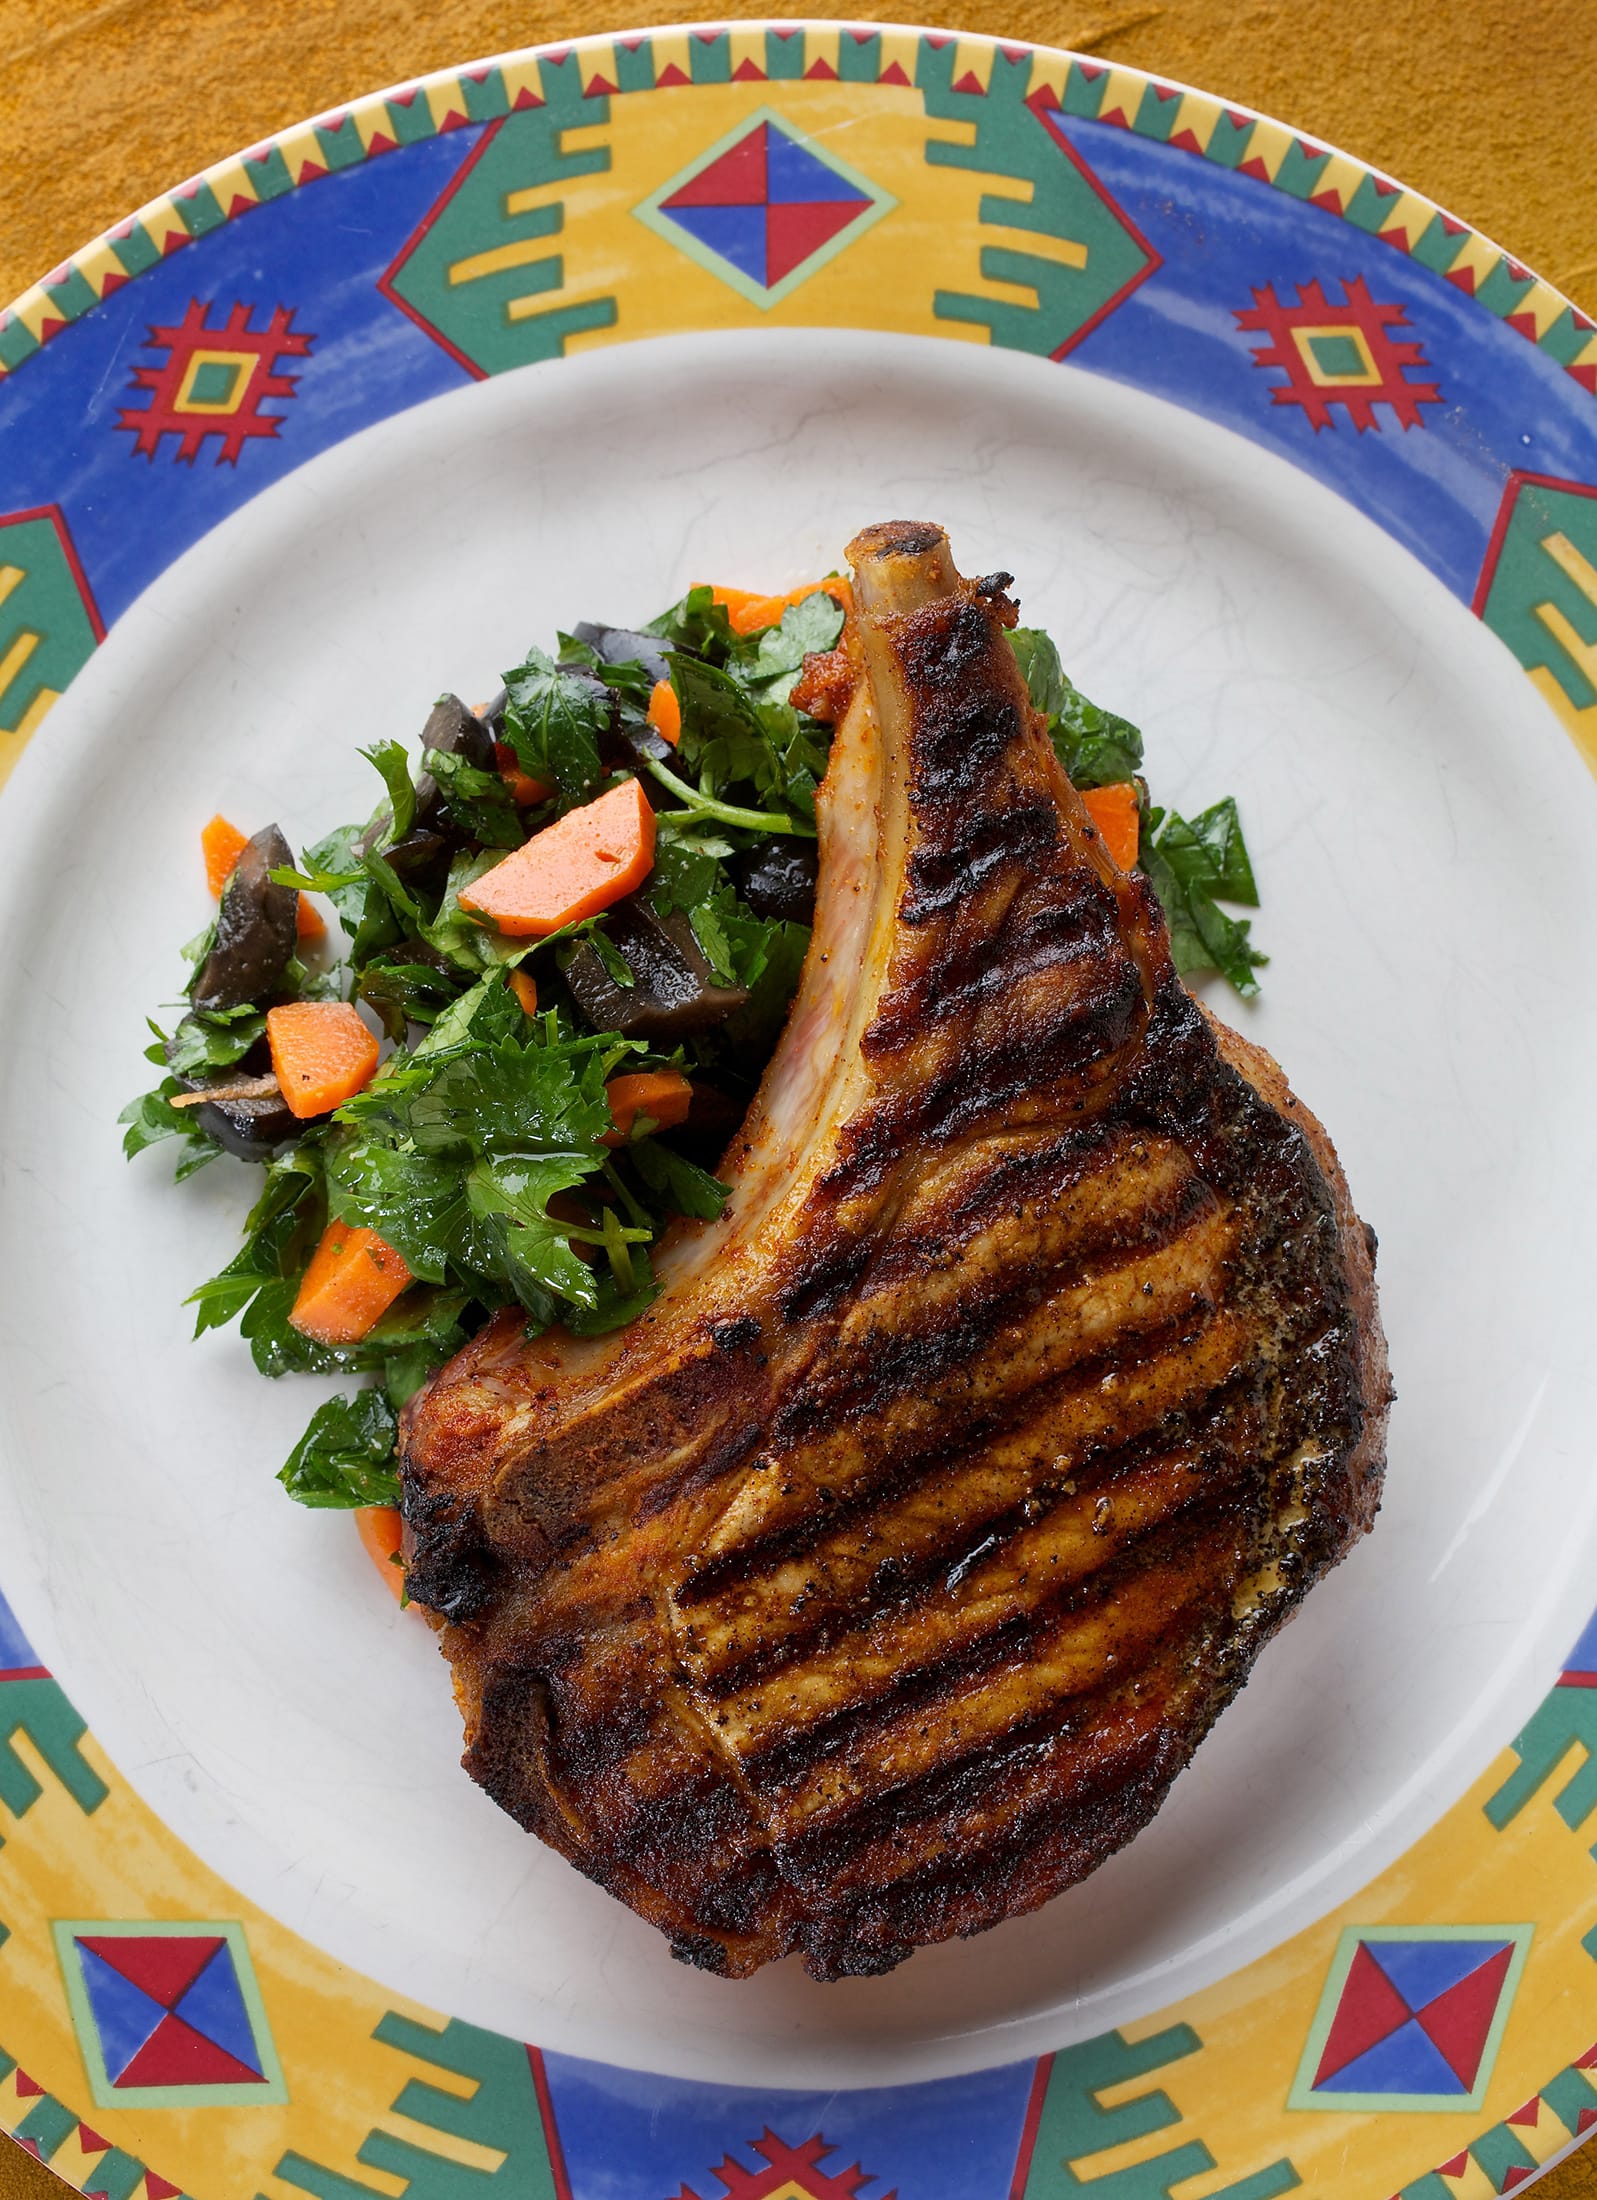 Paprika Pork Chops With Carrot and Olive Salad.